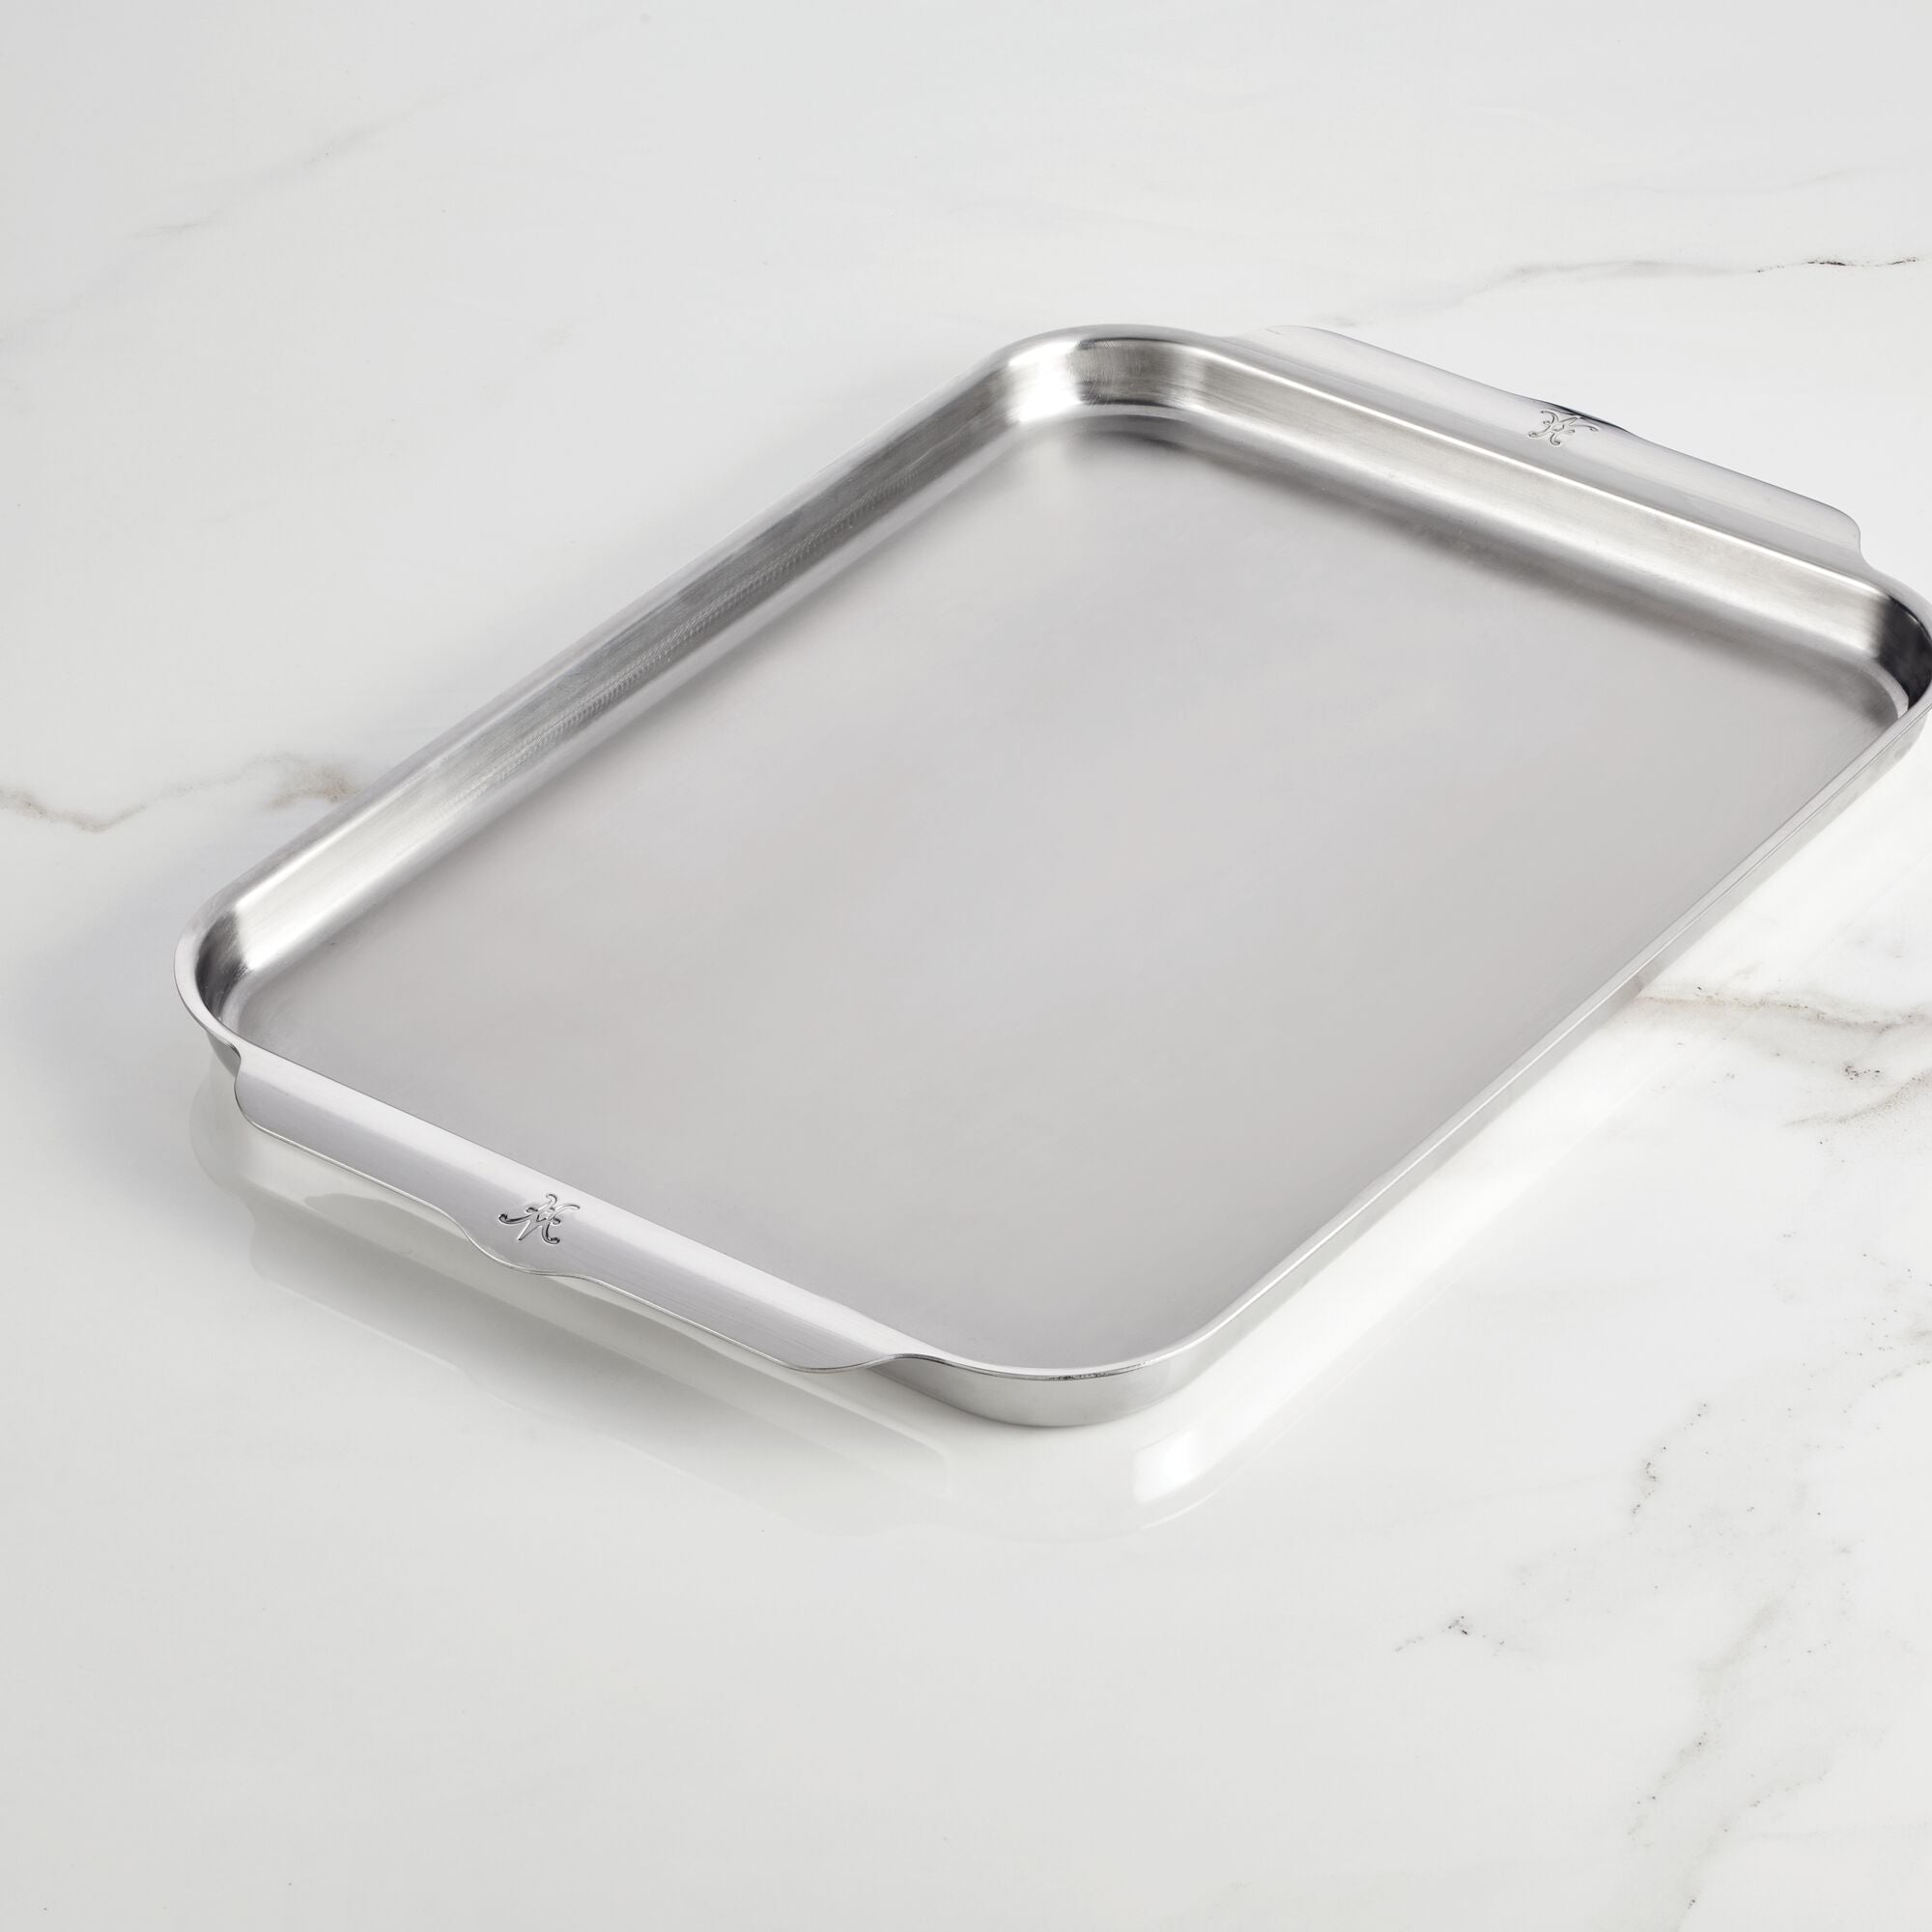 Simply Essential Nonstick Rectangle Aluminum Baking Sheet Pan - Silver - 1 Piece - 11 x 17 inch